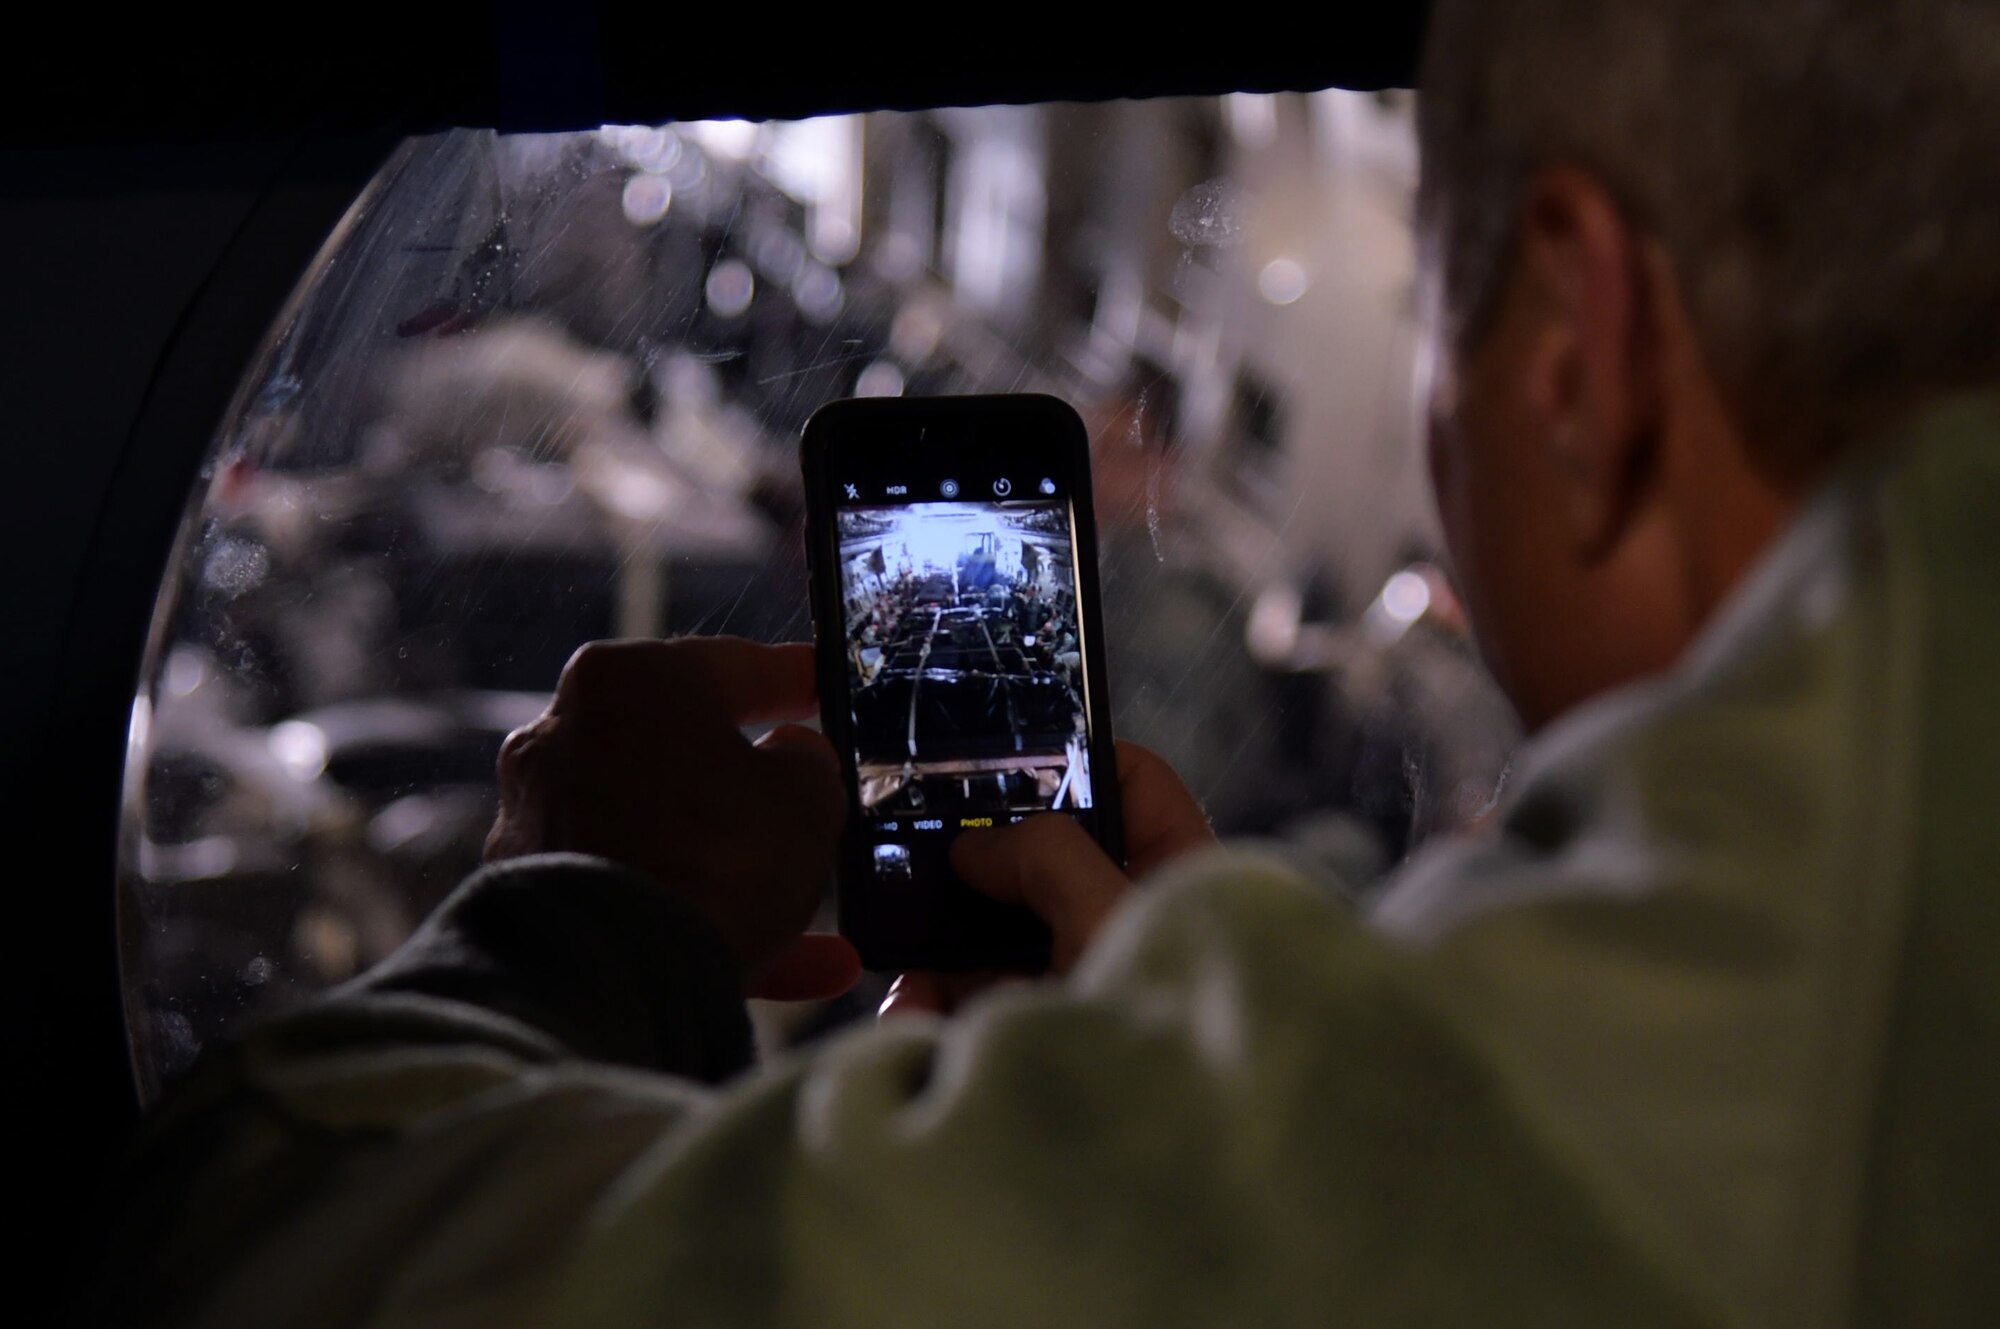 Col. Chuck Henderson, 621st Contingency Response Wing commander, takes a photo of Airmen assigned to the CRW in a C-17 Globemaster III before they depart to support humanitarian relief efforts in Port-au-Prince, Haiti, October 6, 2016. The CRW is supporting the government of Haiti's request for humanitarian assistance. (U.S. Air Force photo by Tech. Sgt. Gustavo Gonzalez/Released)